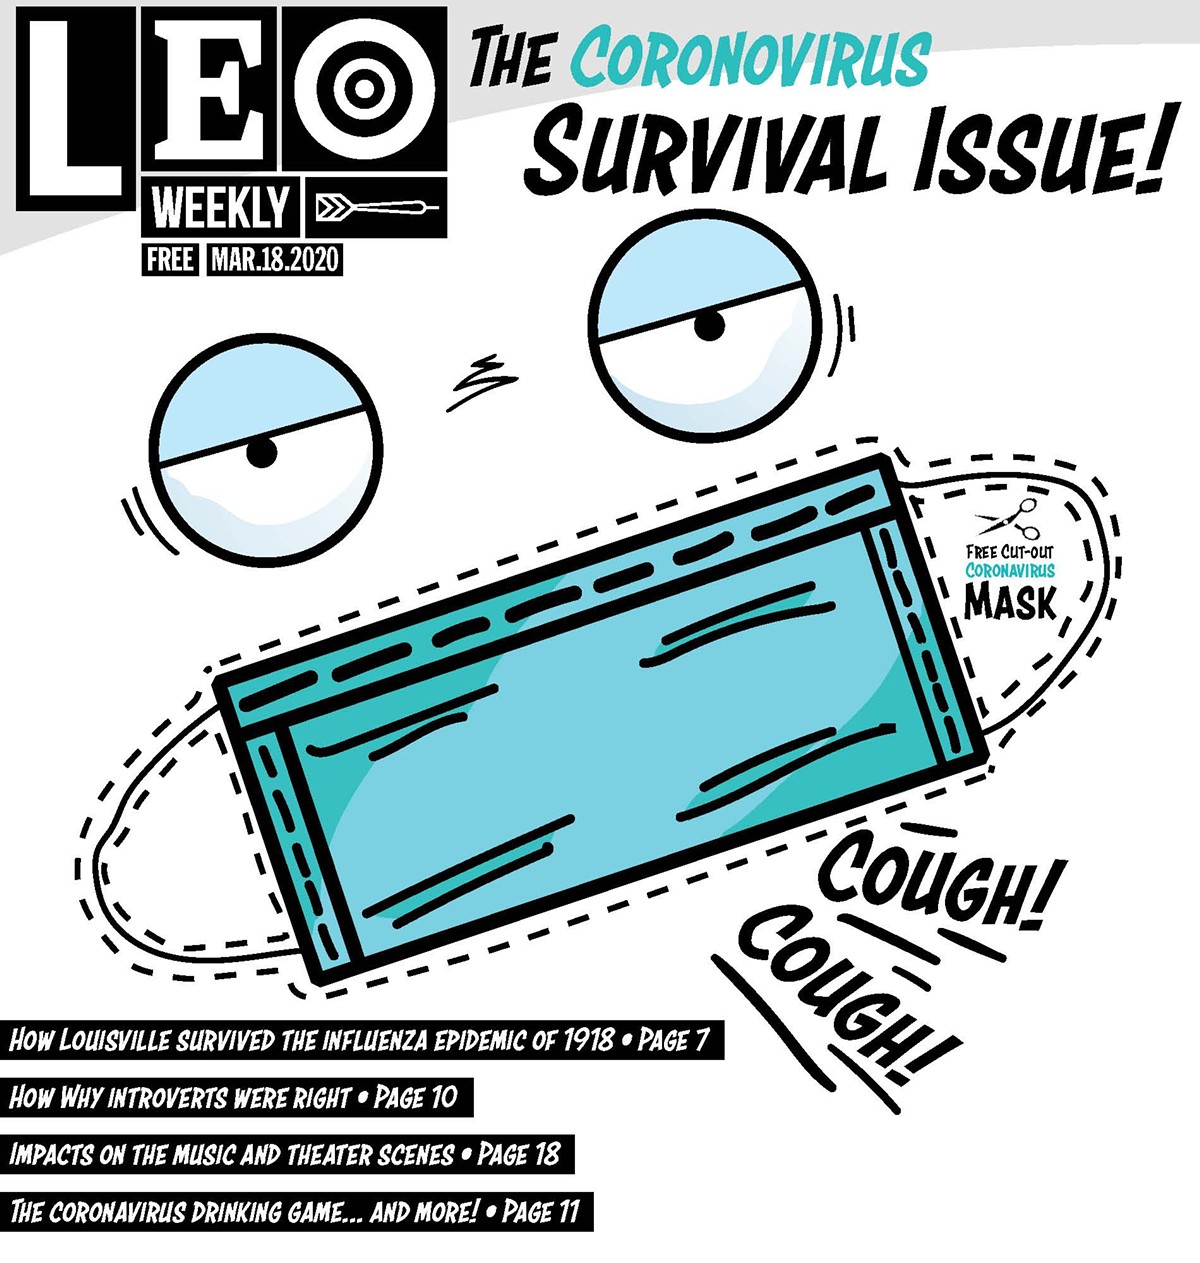 Here is the PDF of the latest issue of LEO Weekly